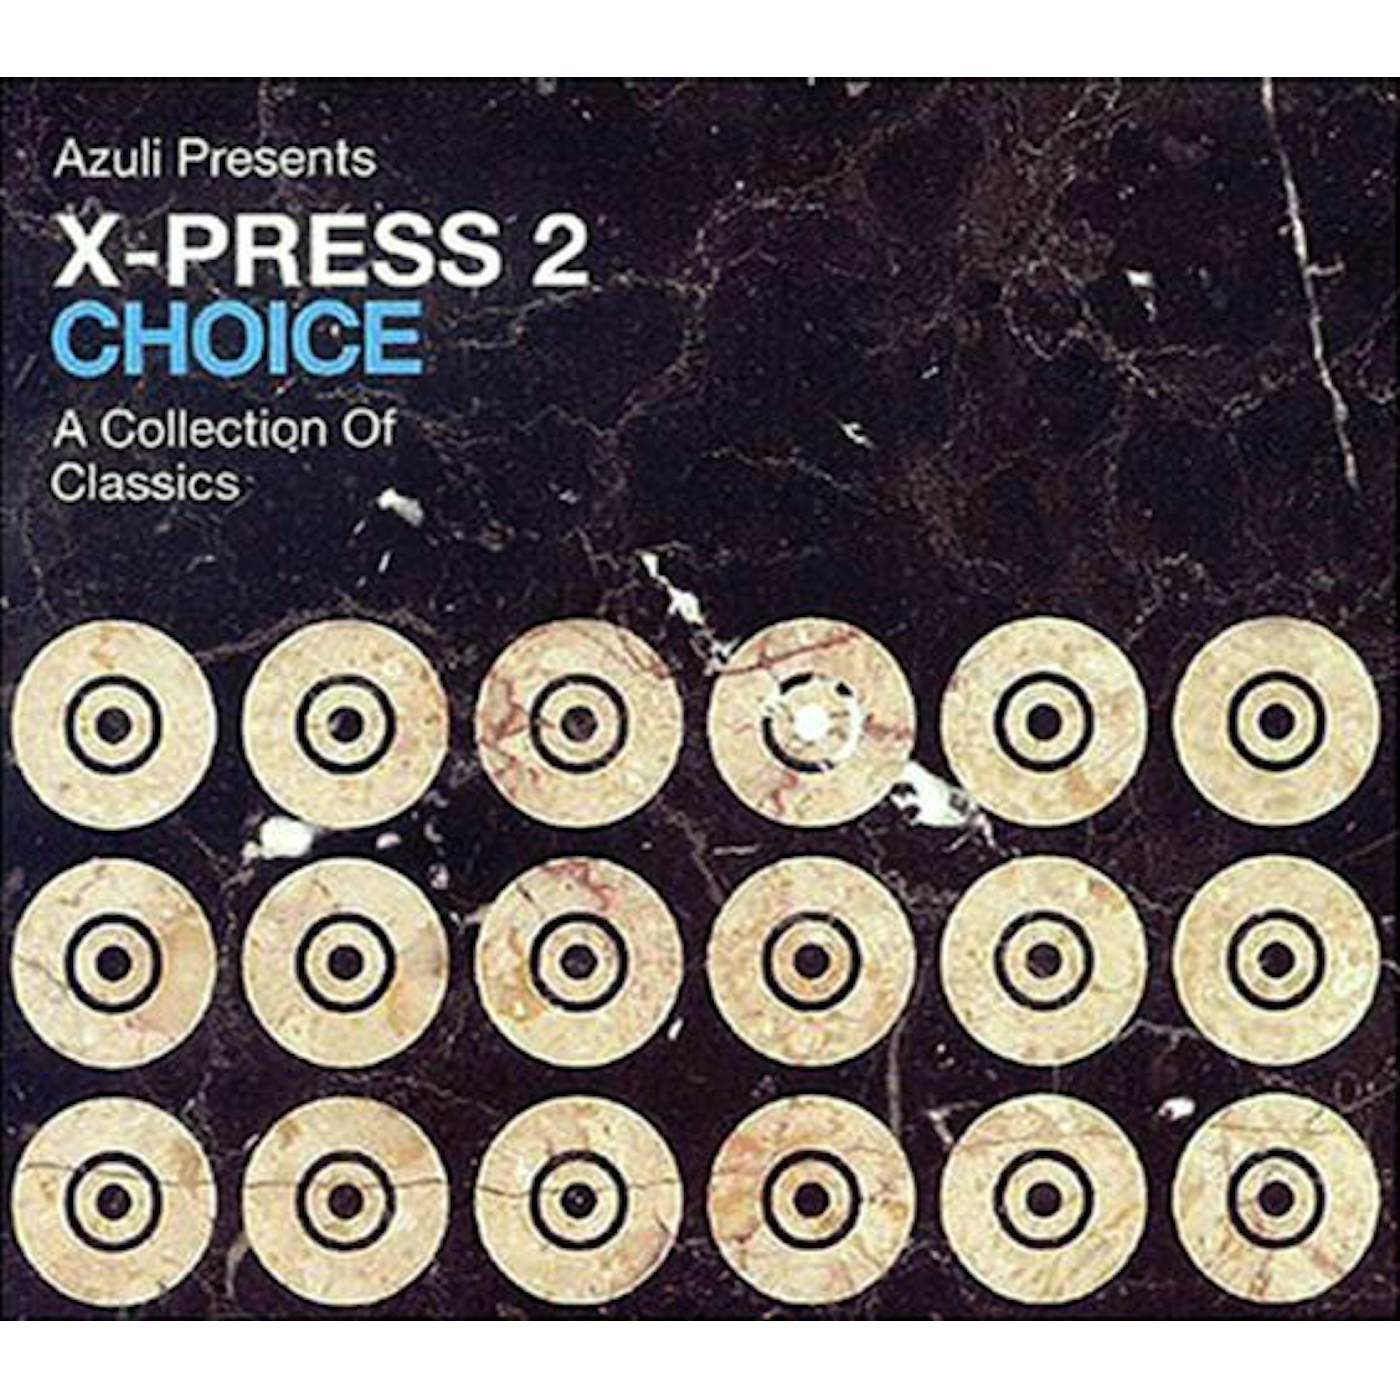 X-Press 2 CHOICE: COLLECTION OF CLASSICS CD